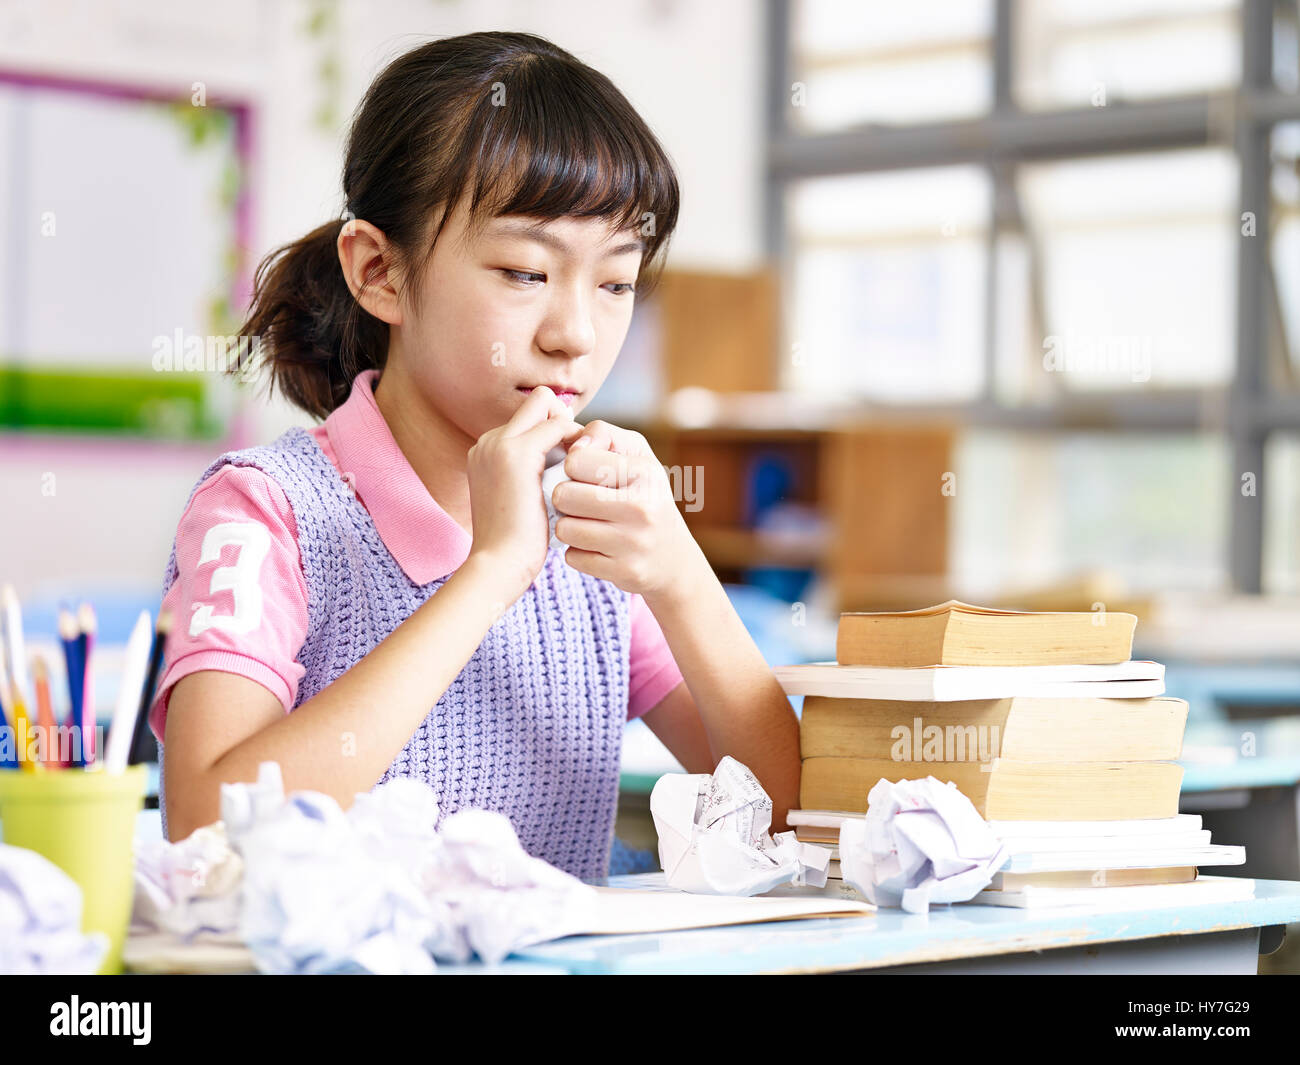 asian primary school schoolgirl crumbling a piece of paper out of frustration. Stock Photo